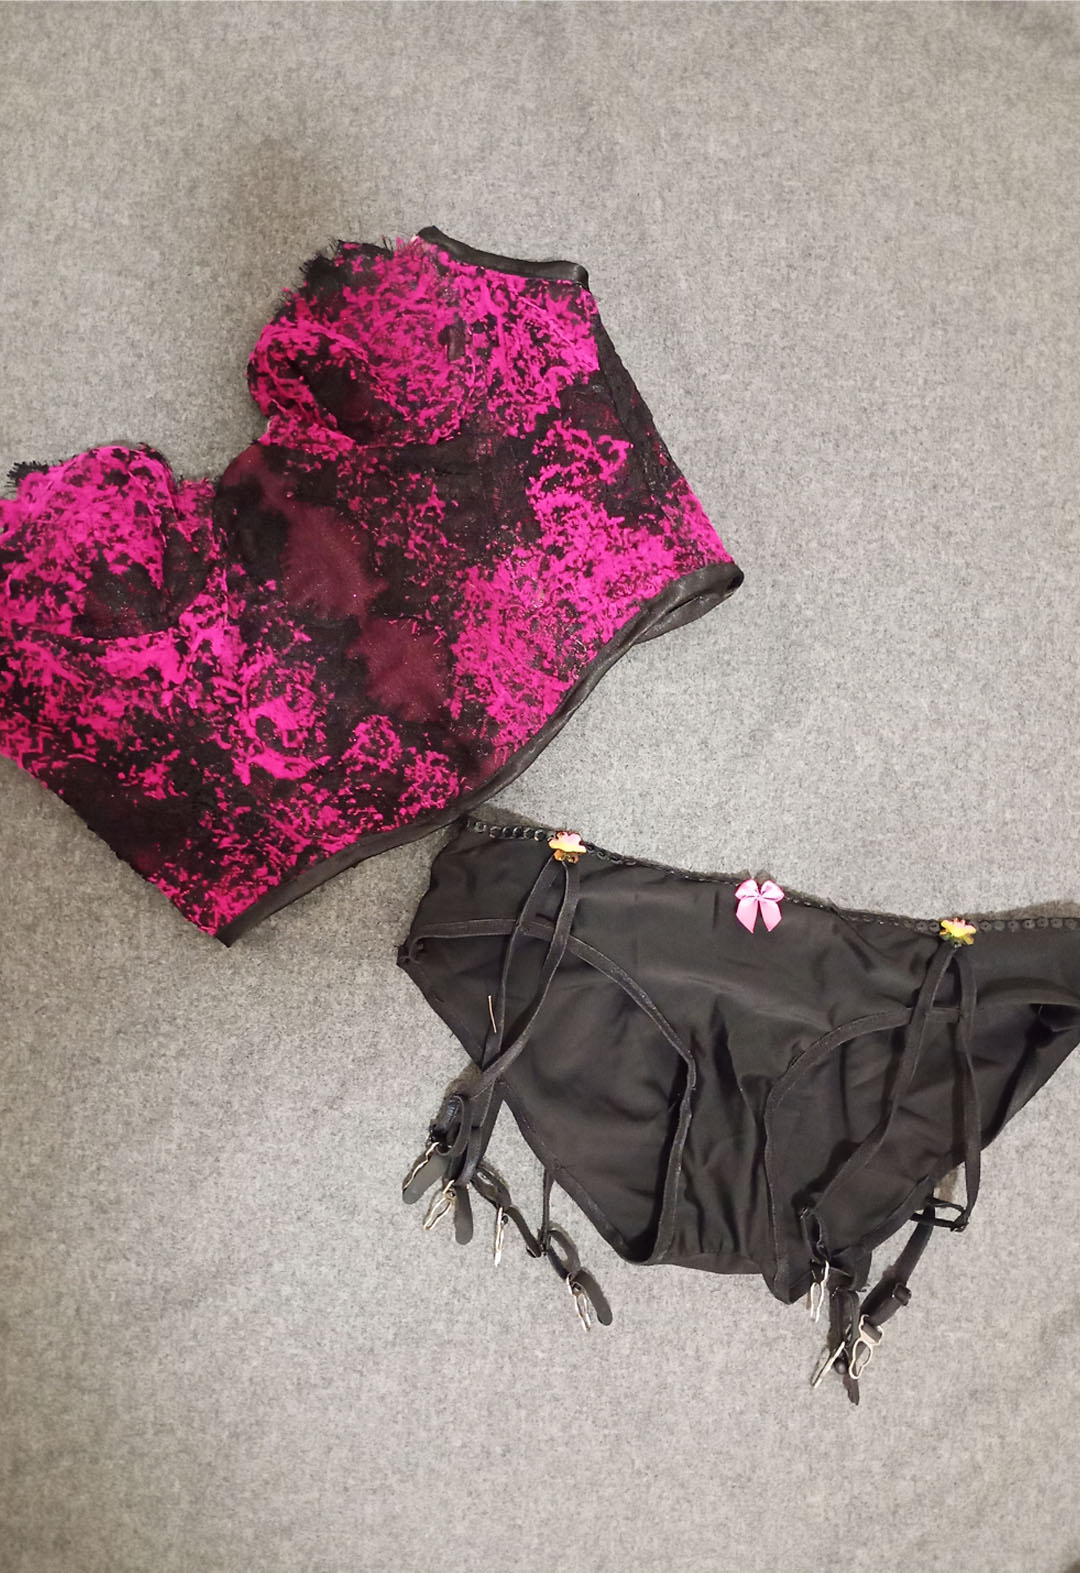 The photo shows a pink-and-black abstract lace bustier and a black panty with built-in garters lying on a gray fabric.